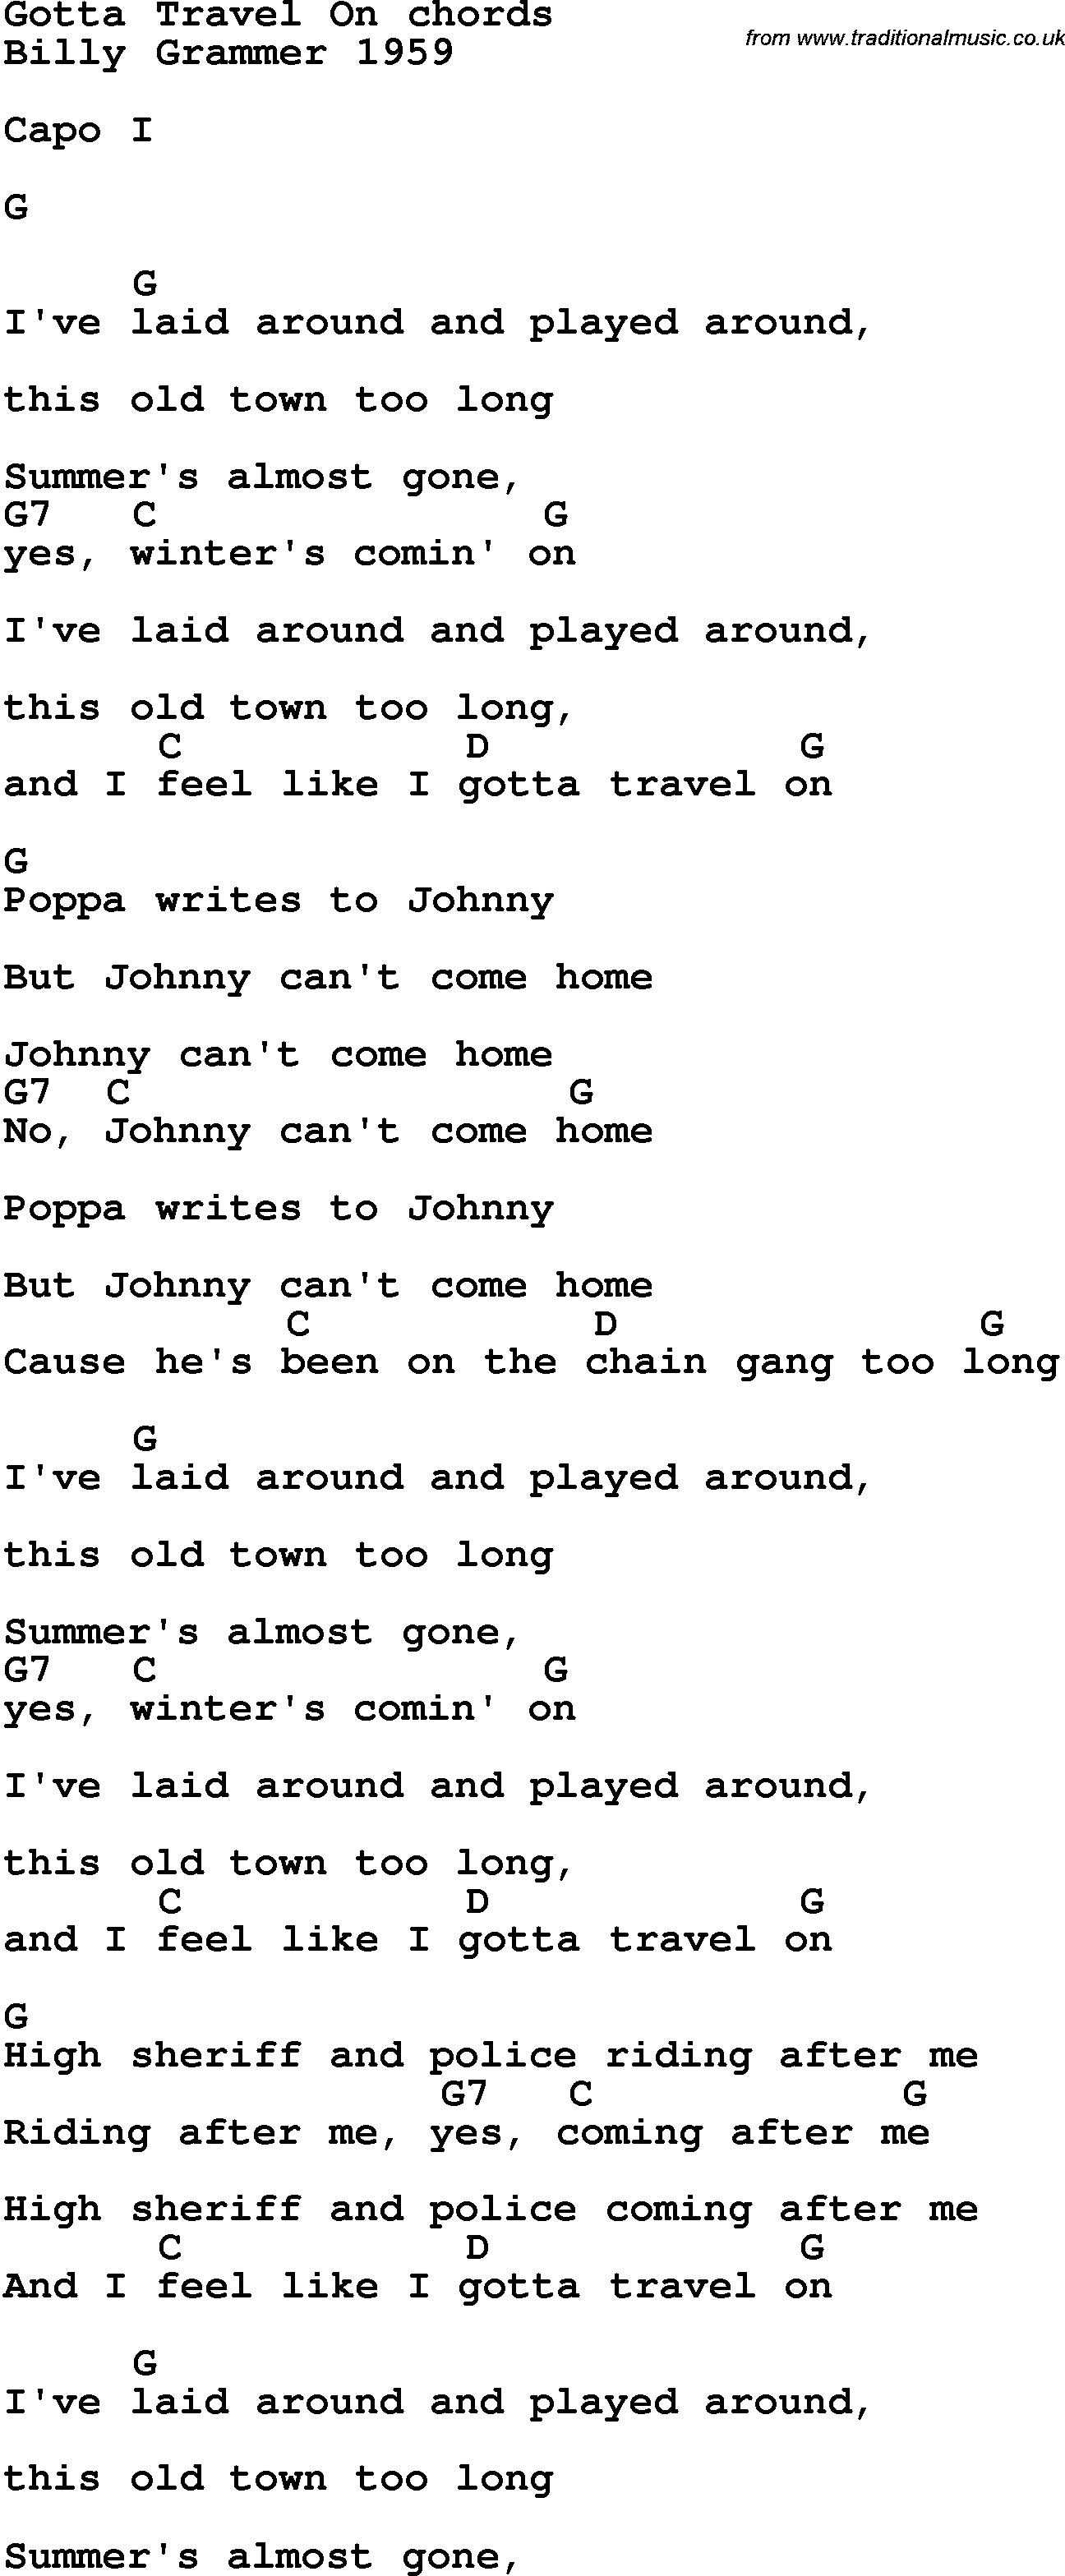 Song Lyrics with guitar chords for Gotta Travel On